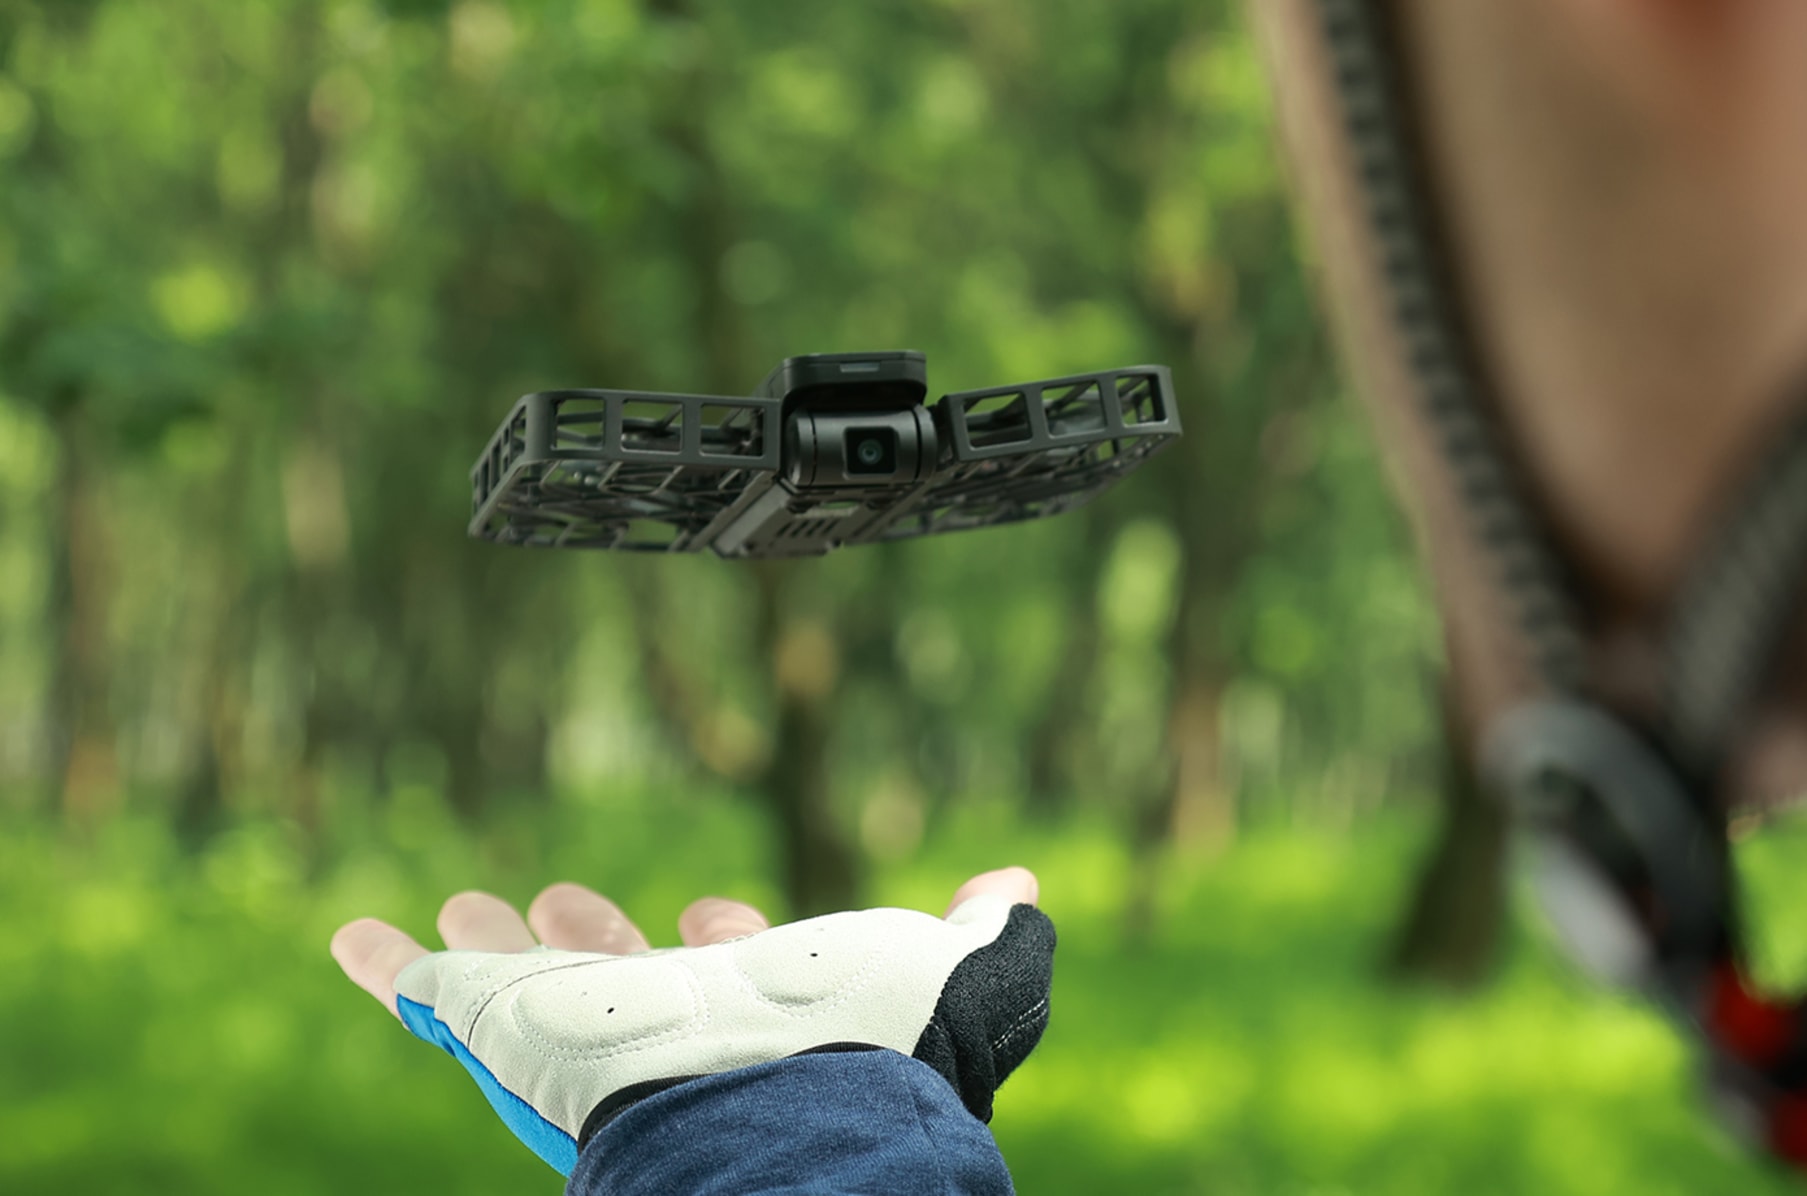 HOVER CAMERA X1 FOLDABLE DRONE Flying Camera By Fedex